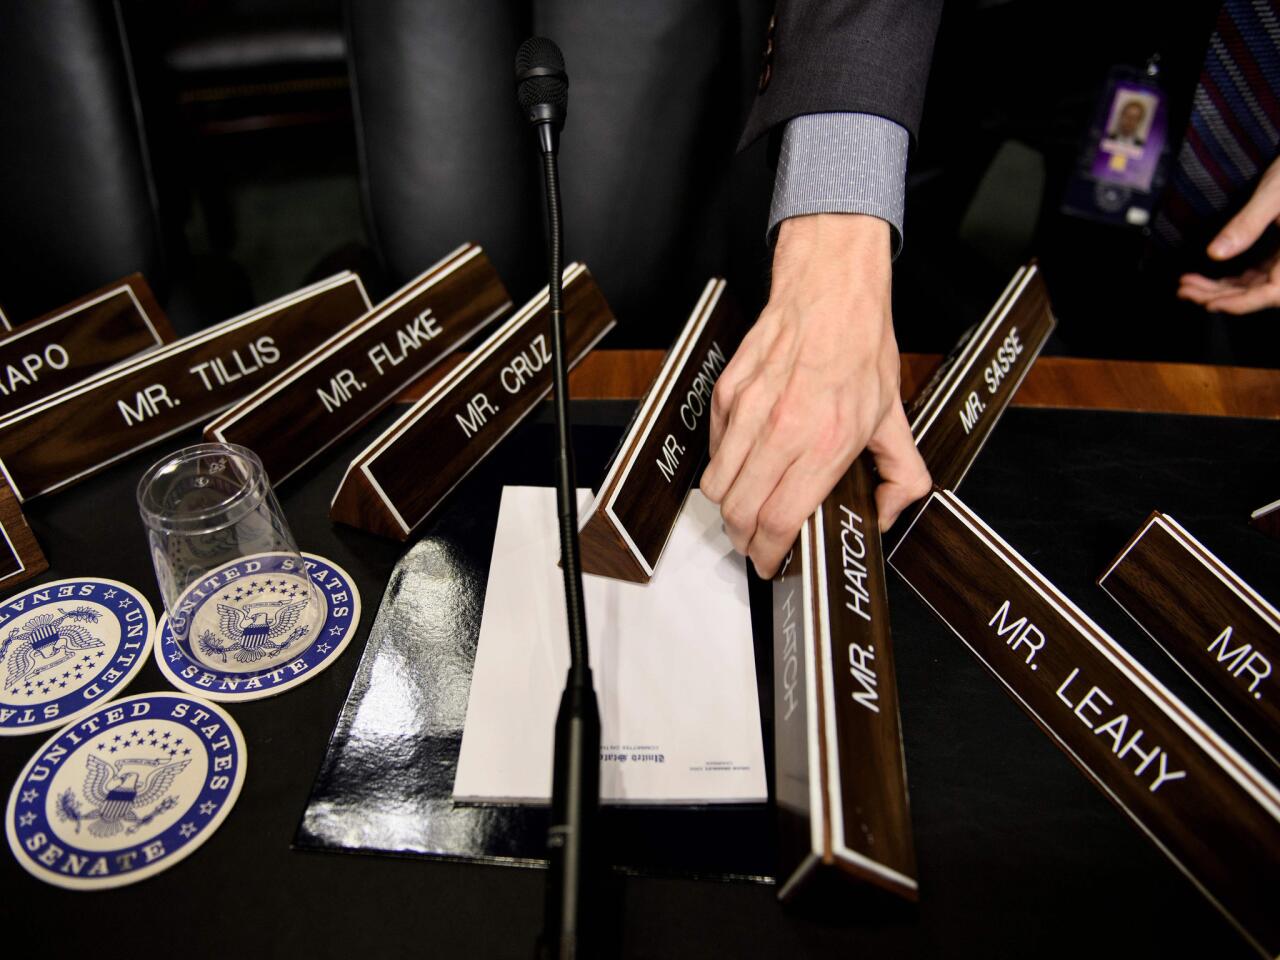 A staff member places name plates as the Senate Judiciary Committee's room on Capitol Hill in Washington, DC, during preparations one day before the hearing with Blasey Ford and Supreme Court nominee Judge Brett Kavanaugh.